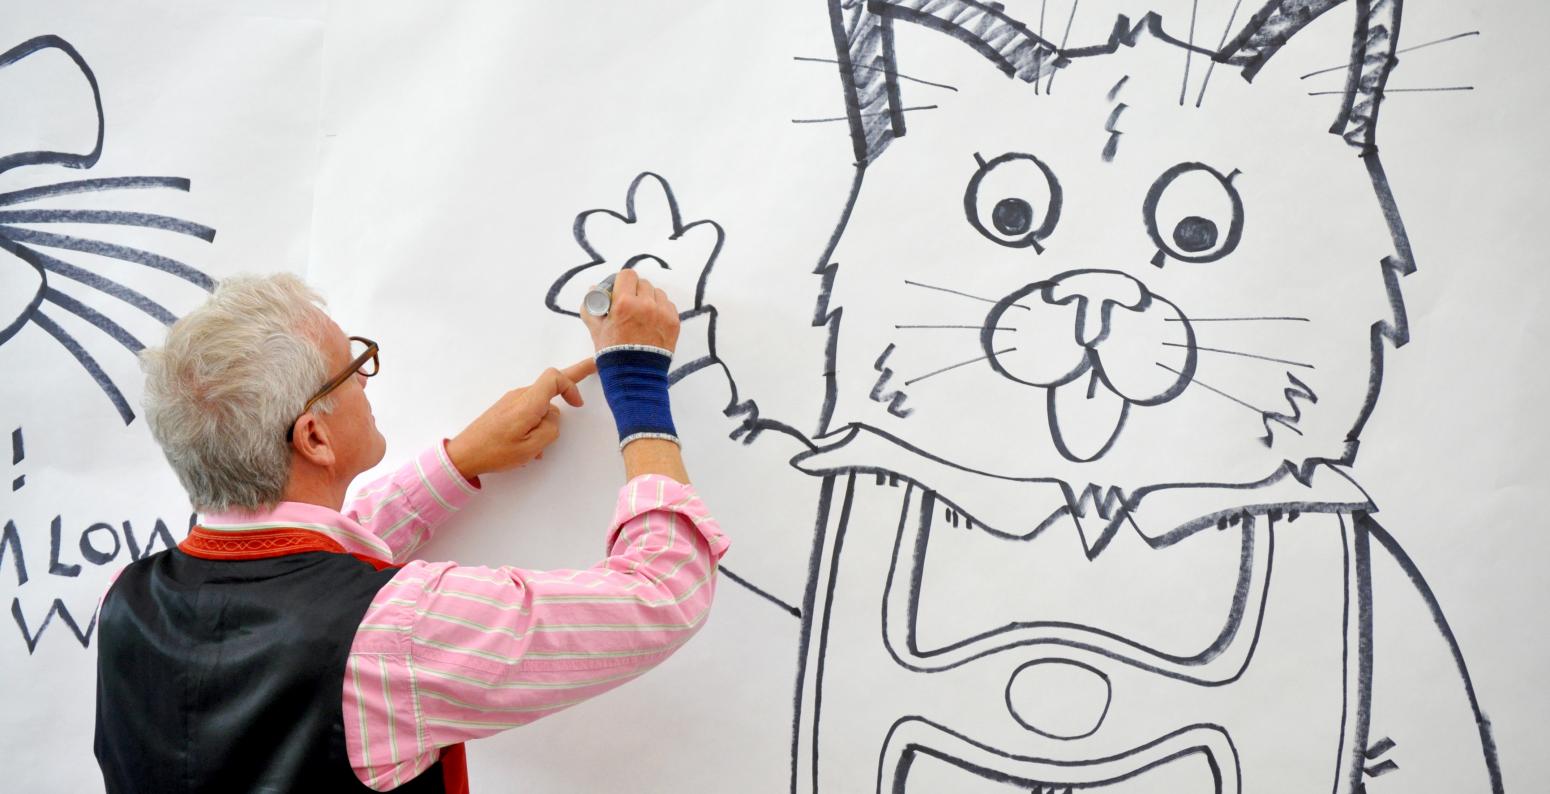 Author/illustrator Huck Scarry drawing a large character on a white wall in black Sharpie.